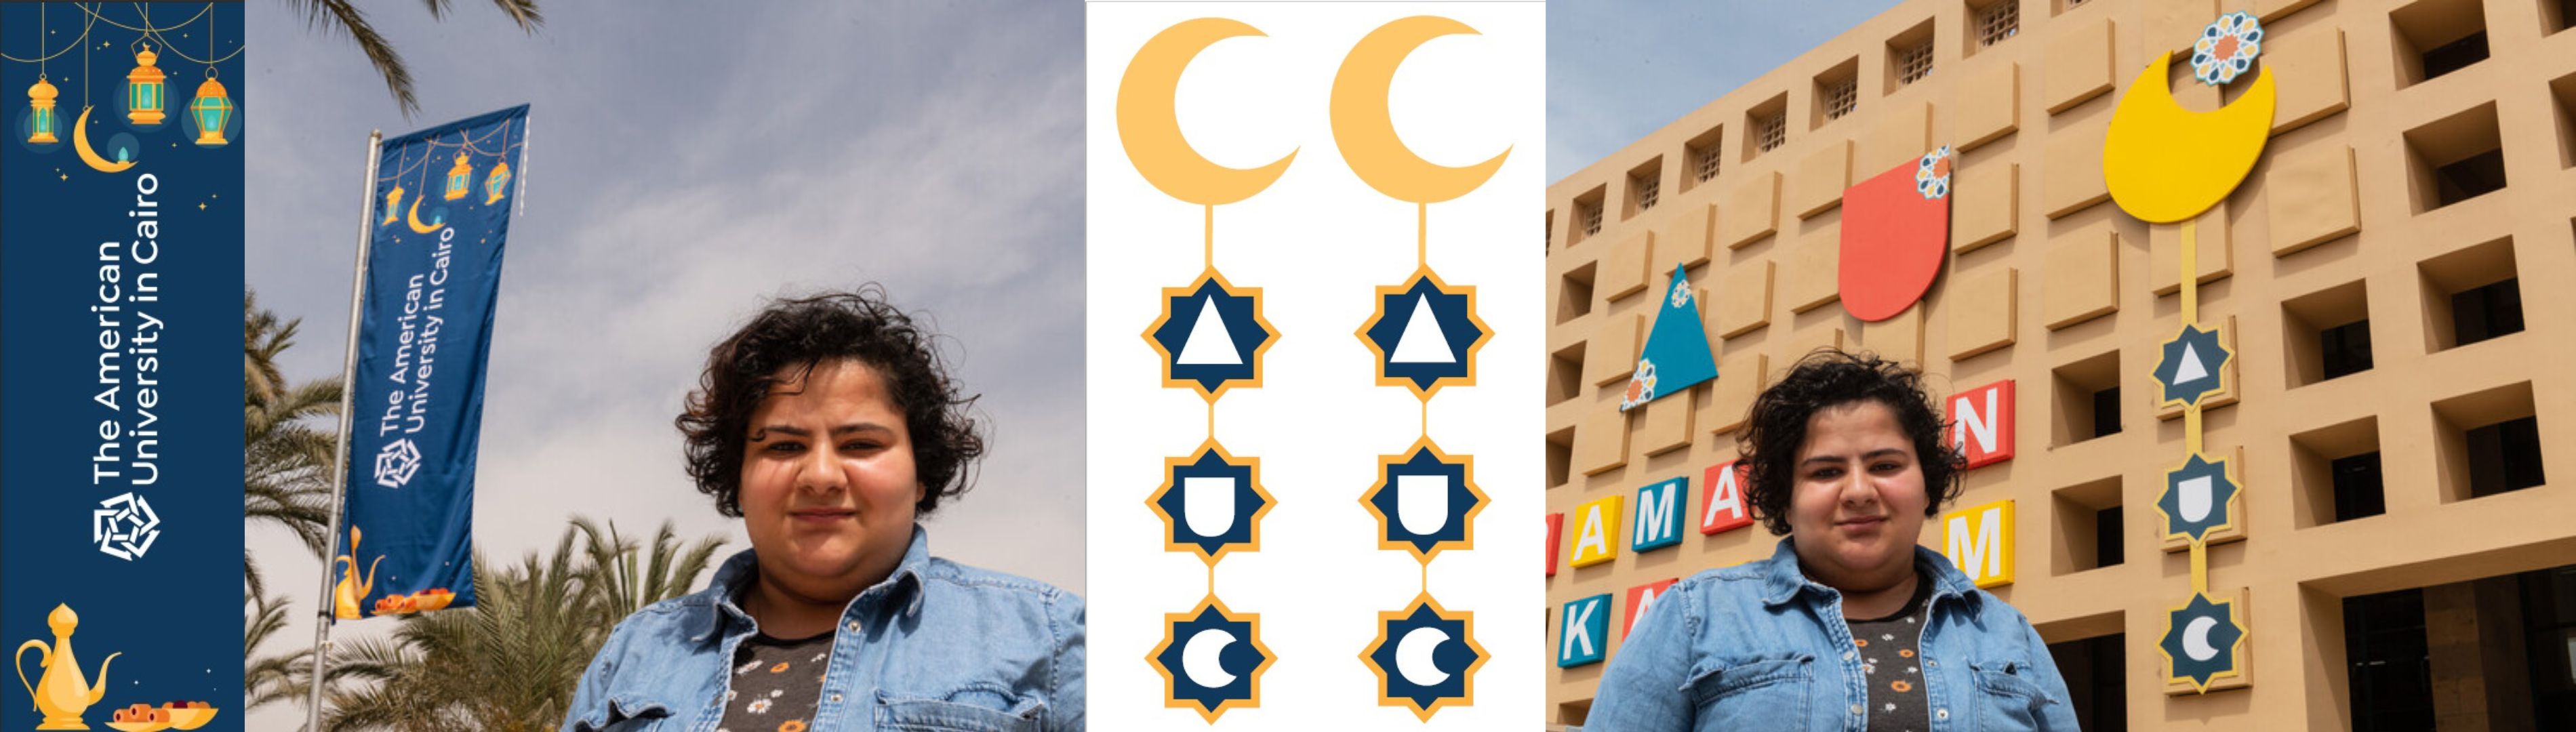 Two photos of Rihem Sejil standing next to her designs on campus with the original design displayed next to them. On the left, a blue hanging banner with the words "American University in Cairo" with lanterns on the top and dates and a tea pot on the bottom. On the right, a hanging design of a yellow crescent with the letters AUC strung beneath it, hanging on the library facade.